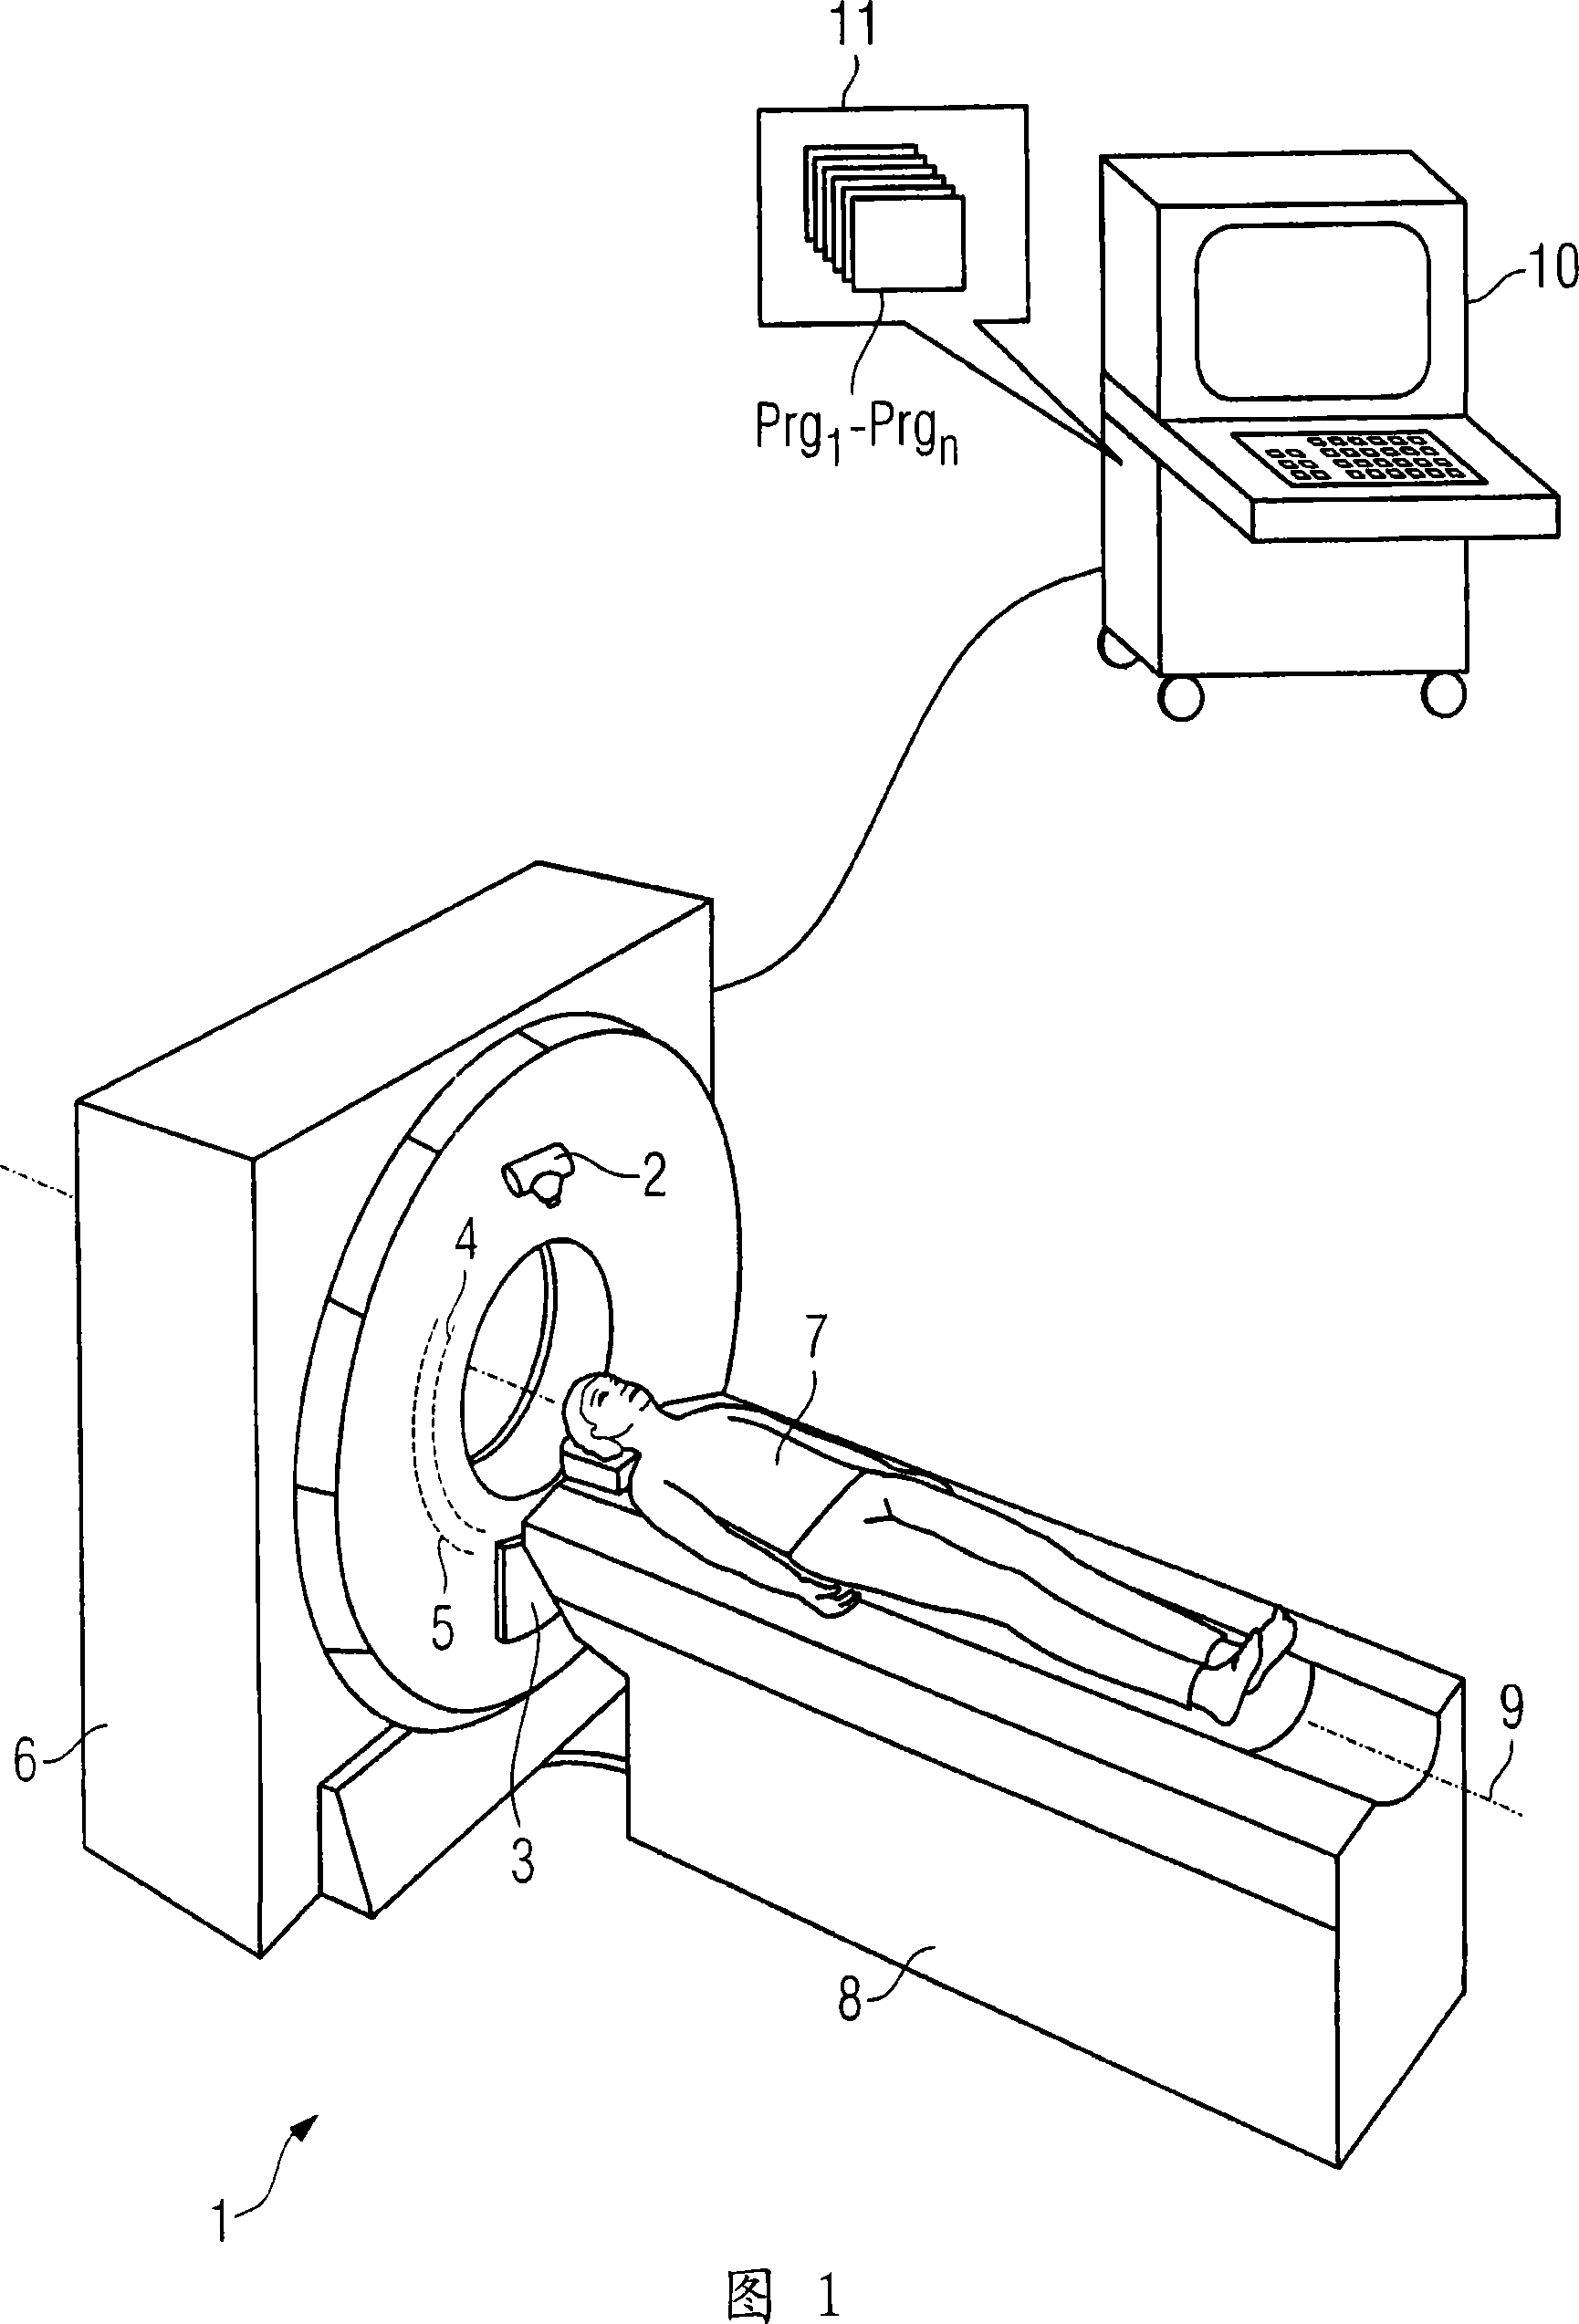 X-ray ct system for producing projecting and tomography contrast phase contrasting photo